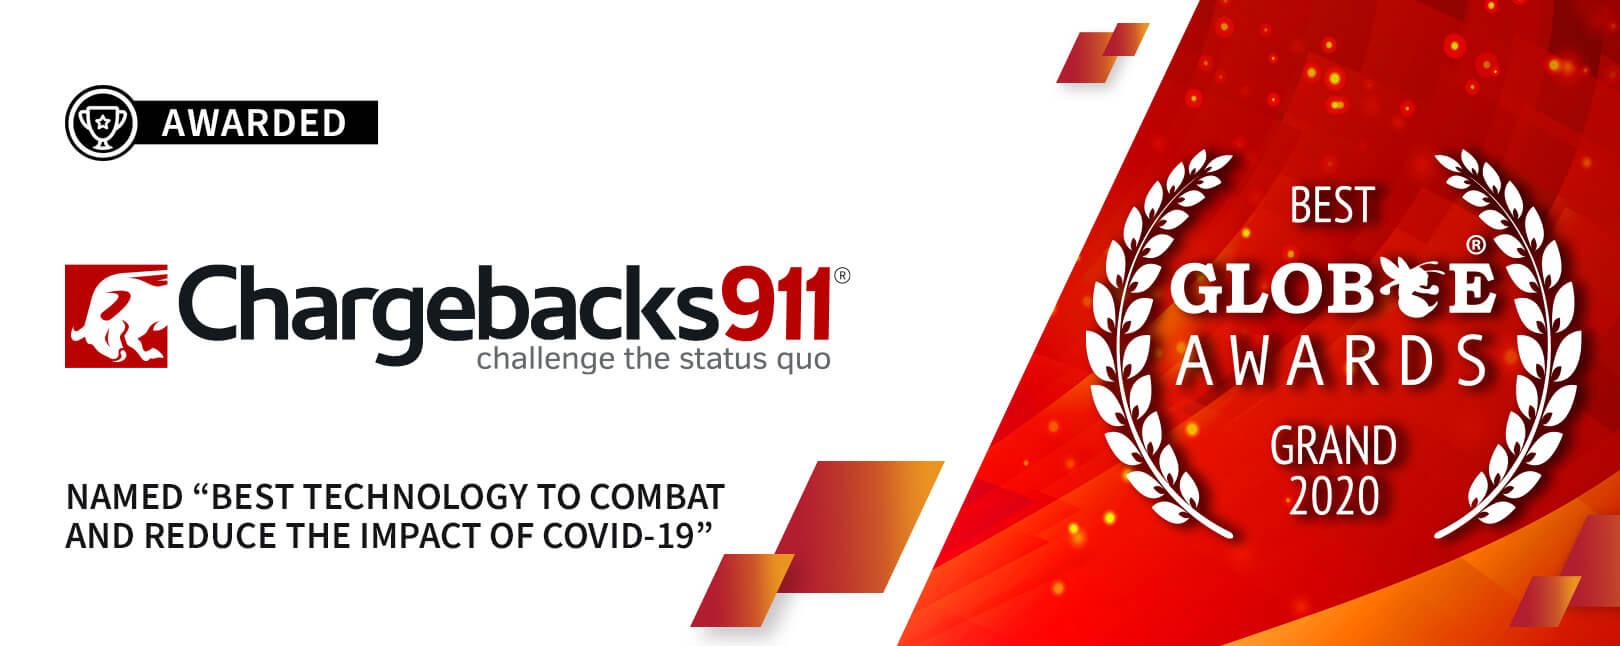 Chargebacks911® Named “Best Technology to Reduce Impact of COVID-19”!